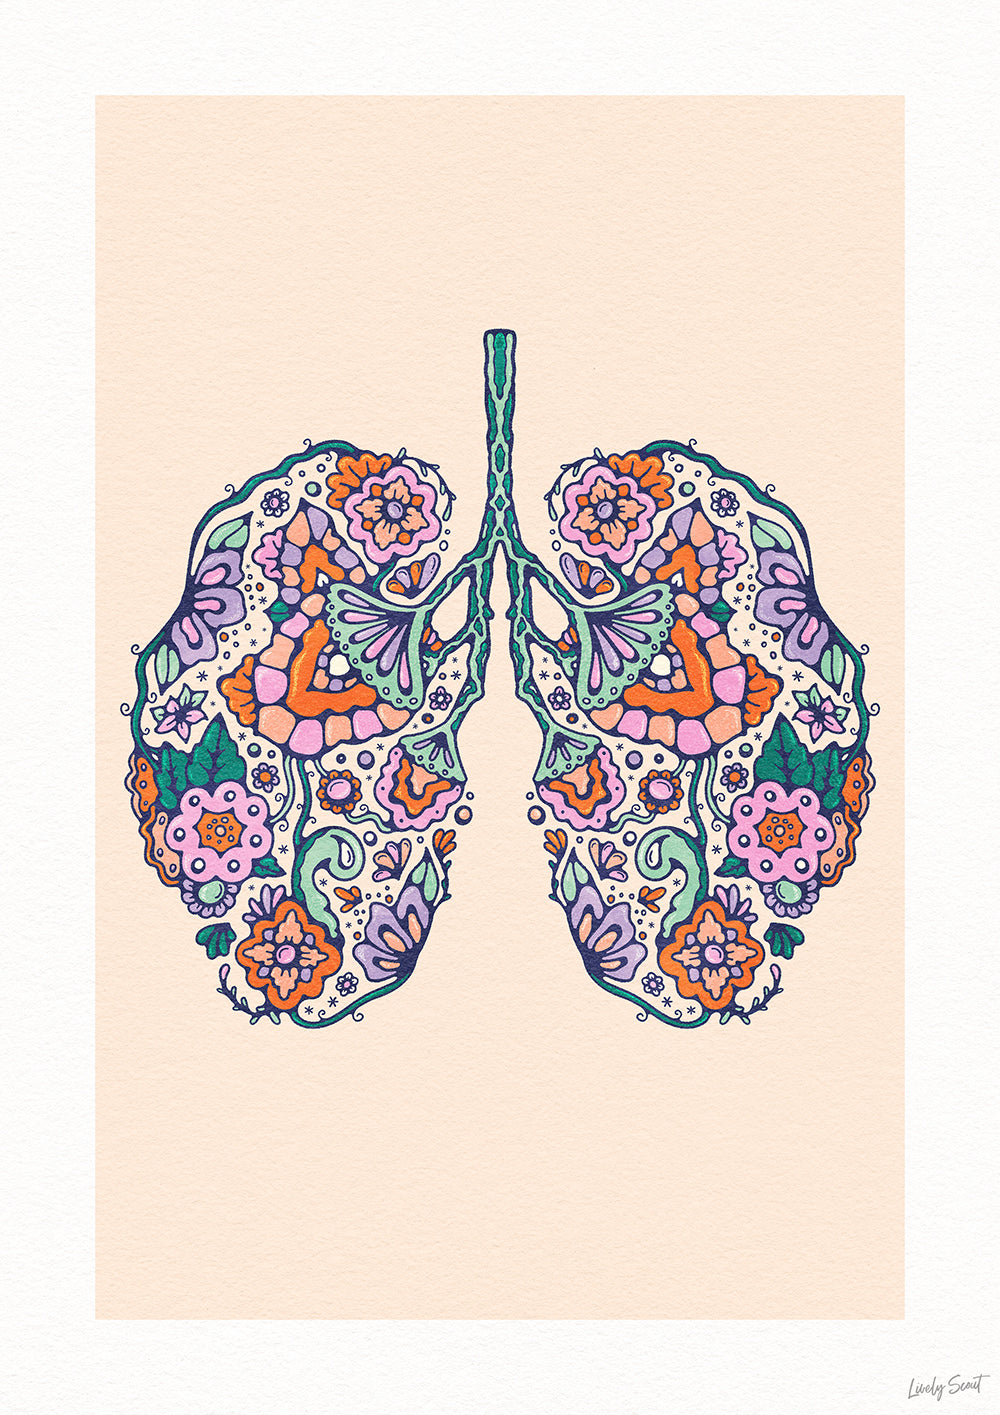 Lungs drawing Vectors & Illustrations for Free Download | Freepik